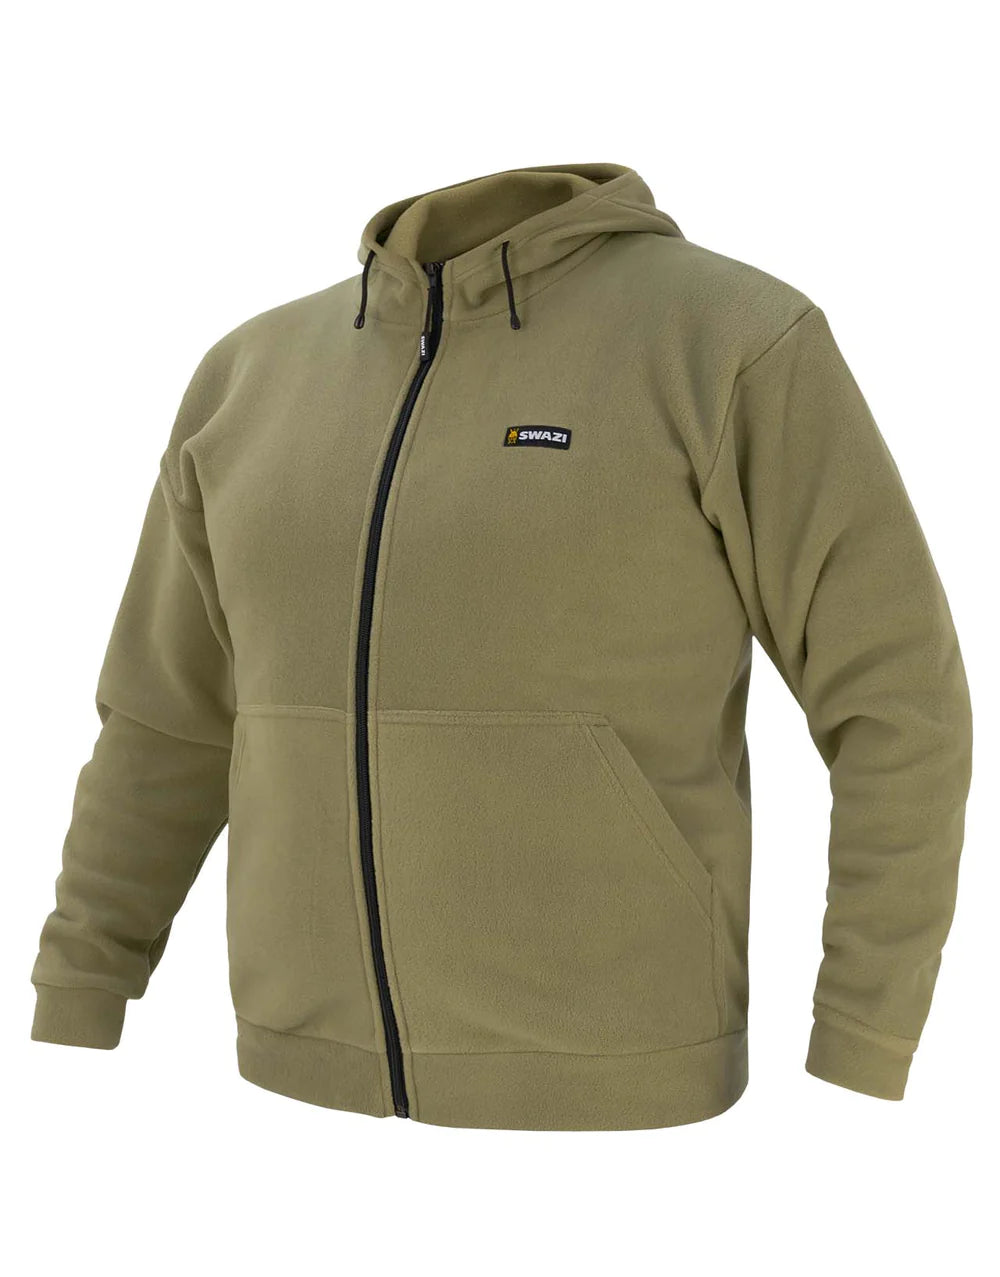 Swazi Hooded Rattler Jacket - XS / TUSSOCK - Mansfield Hunting & Fishing - Products to prepare for Corona Virus